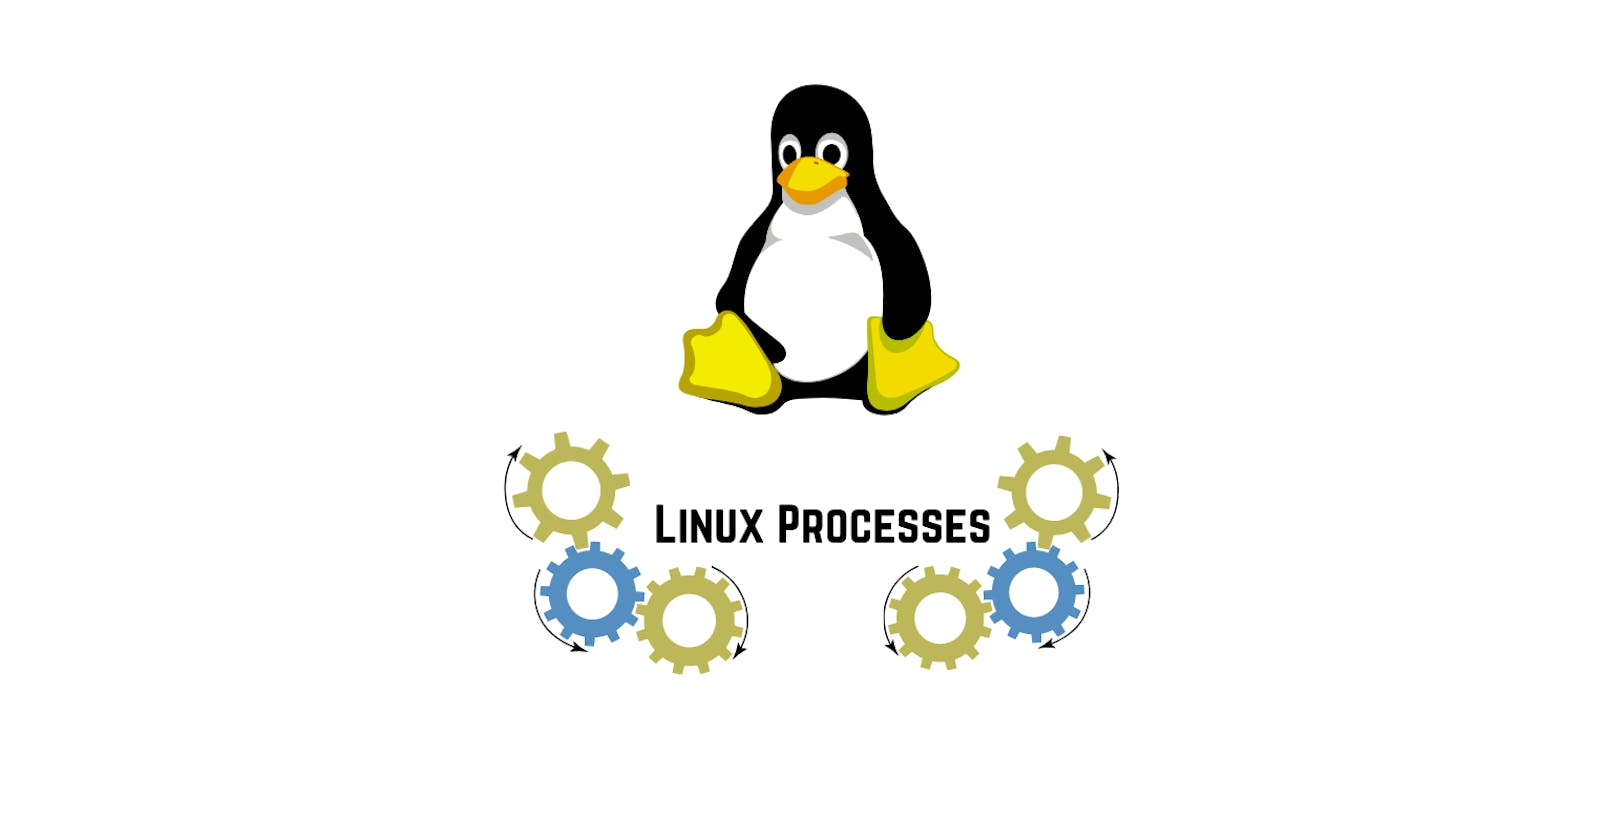 Processes in Linux